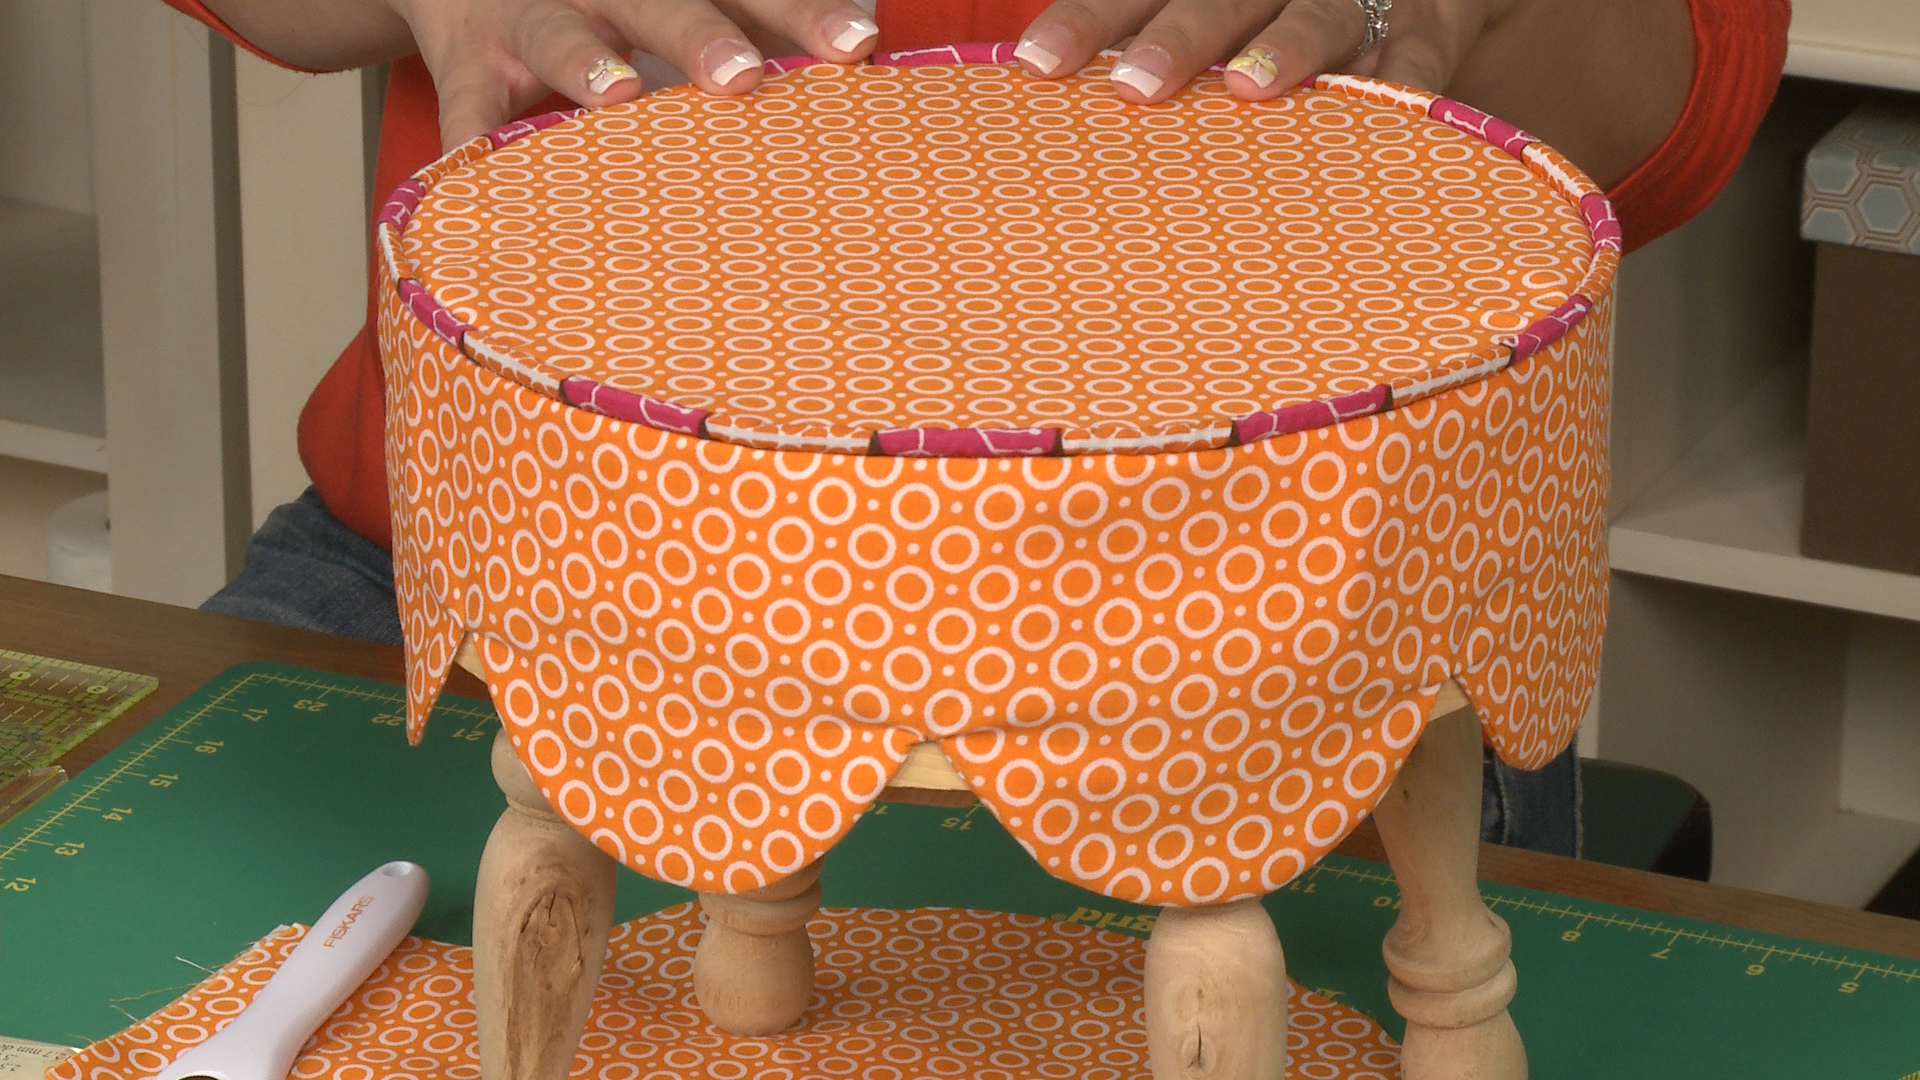 Padded seat cover for a stool